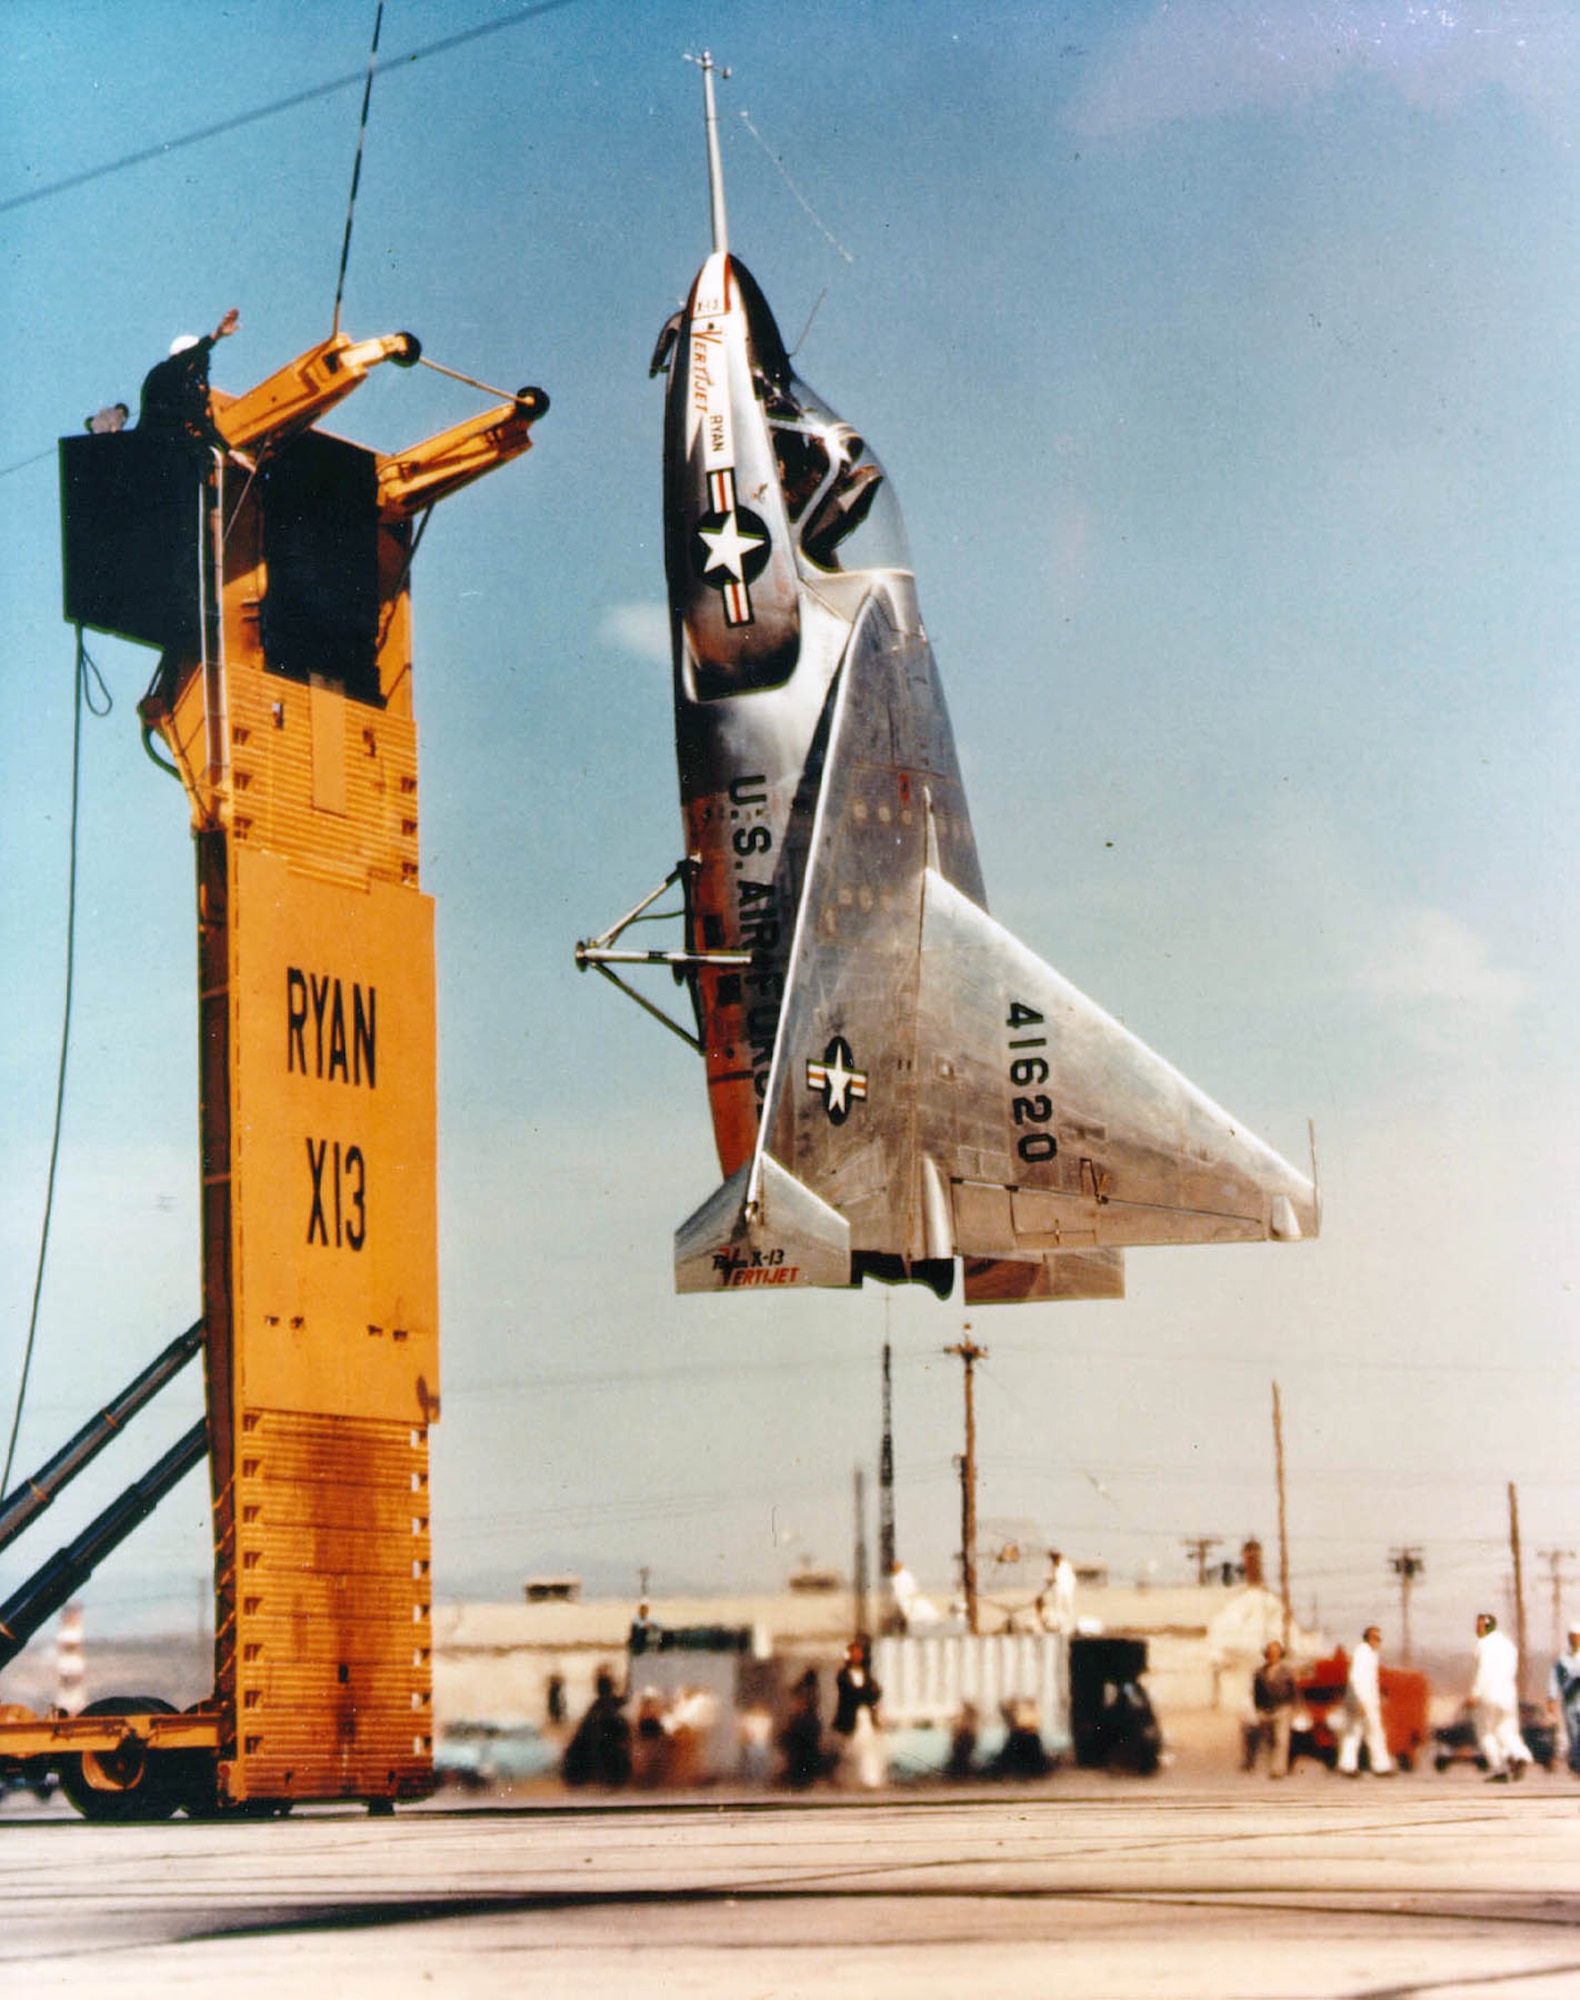 The museum’s X-13 making a test flight in 1957. The X-13 “landed” by hooking onto a cable at the top of the raised platform. This trailer-mounted platform could then be lowered to a horizontal position. (U.S. Air Force photo)